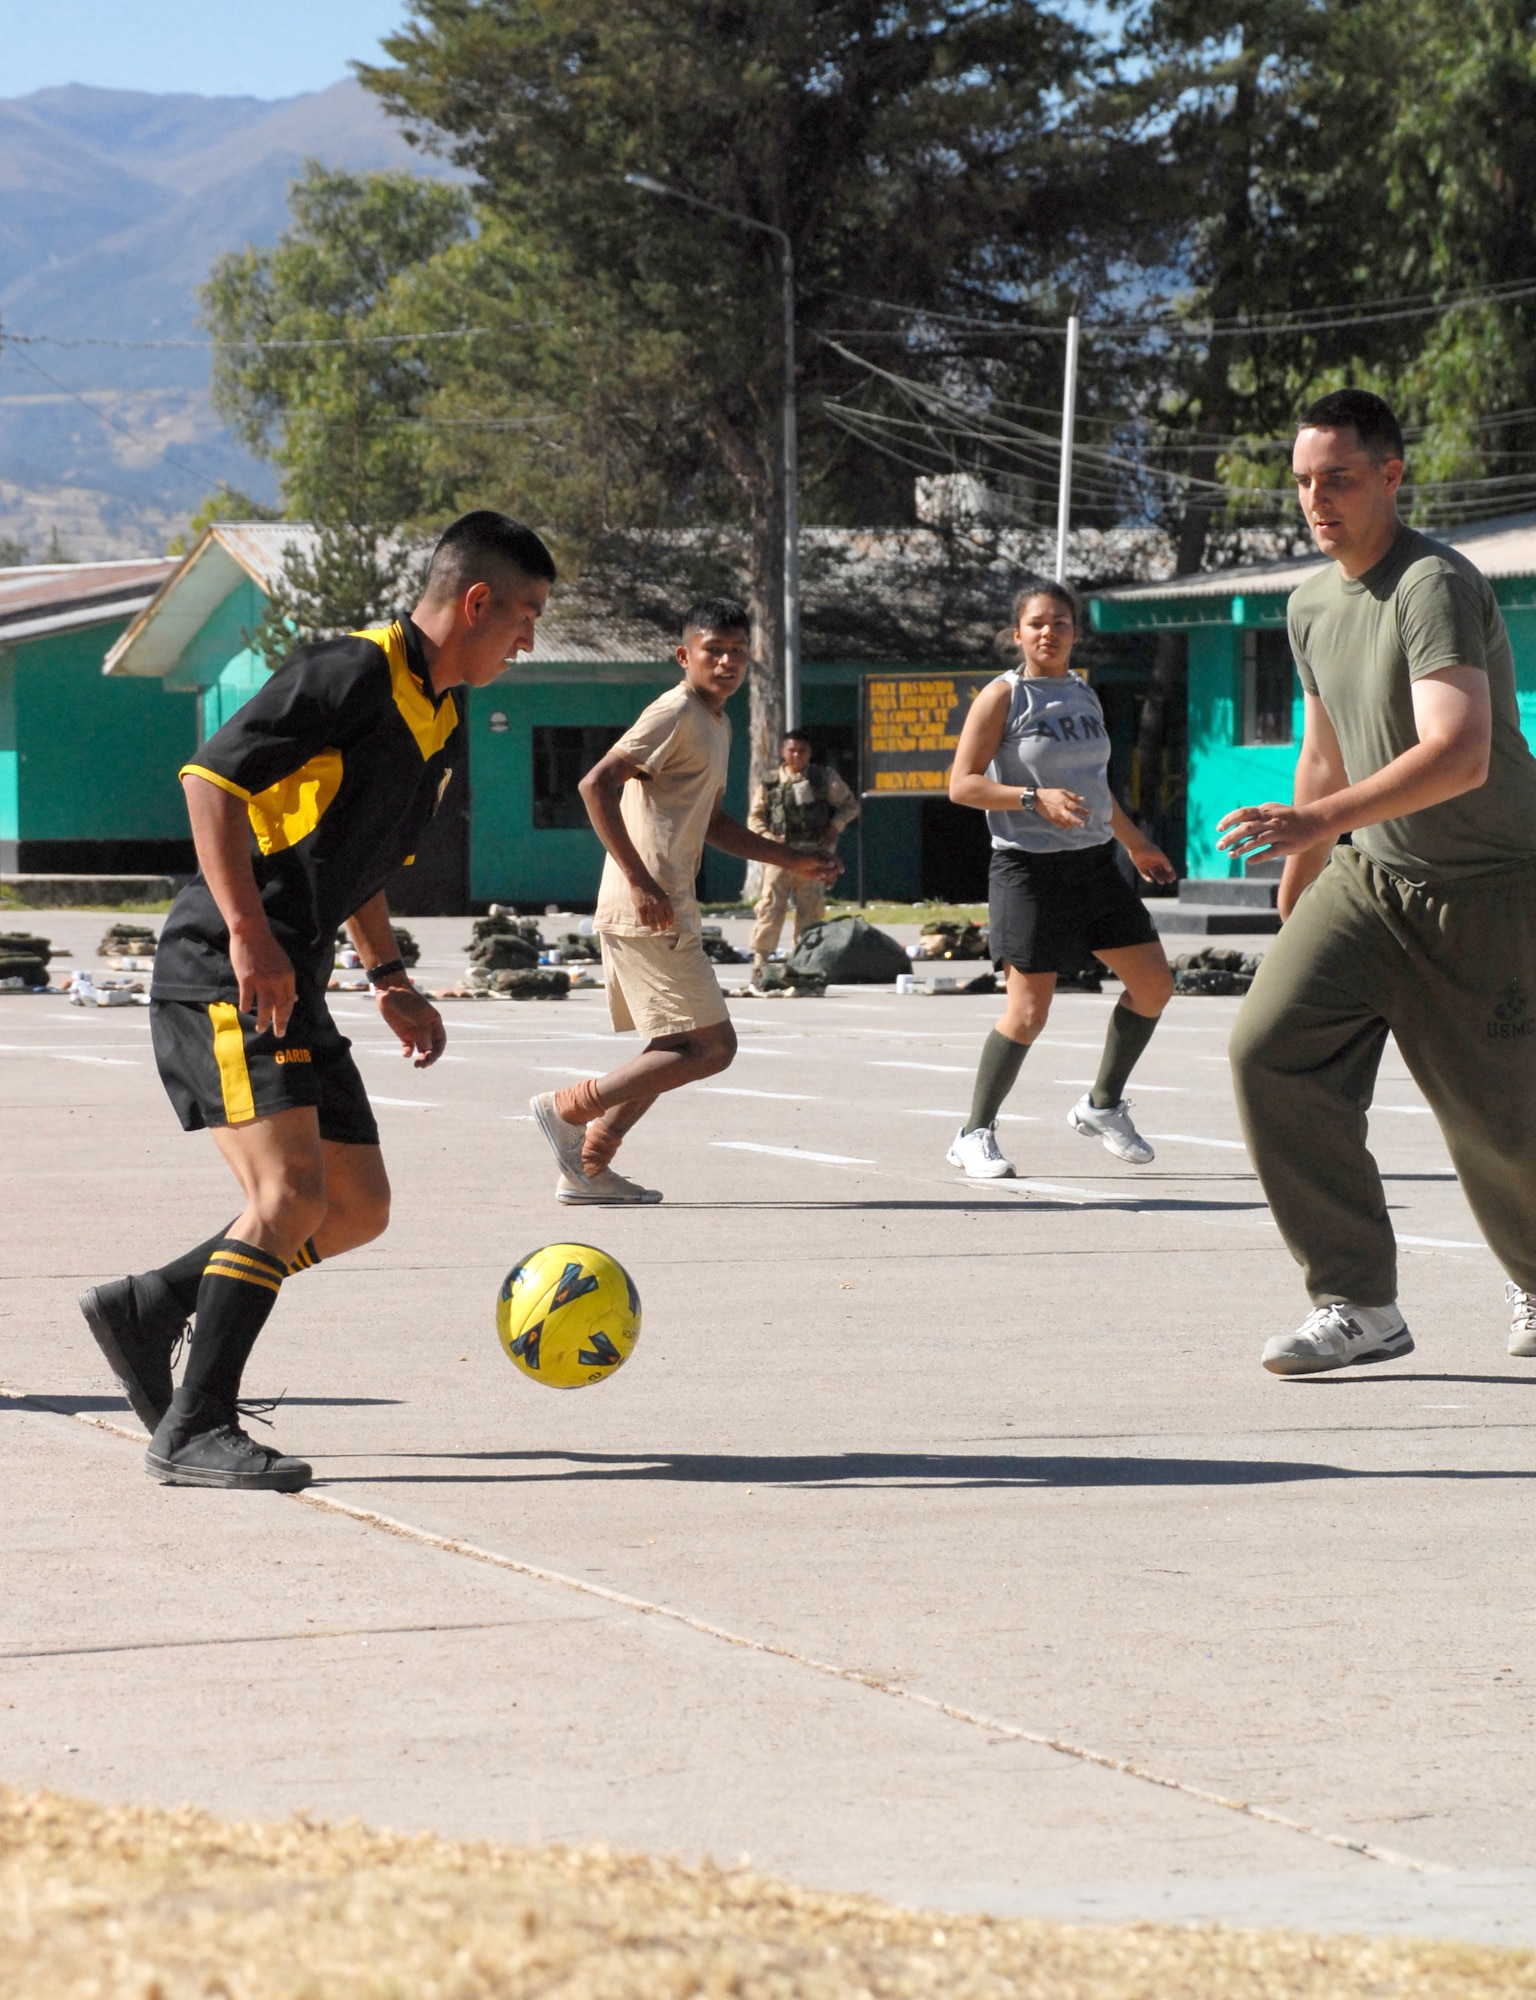 U.S. servicemembers assigned to Task Force New Horizons, and Peruvian soldiers play a game of soccer during their off time, June 8, on a Peruvian Army base in Ayacucho, Peru, the region benefiting from the humanitarian efforts of New Horizons Peru-2008. New Horizons is a U.S. and Peruvian partnered effort to help underprivileged Peruvians by building schools, clinics, and wells. (U.S. Air Force photo/Airman 1st Class Tracie Forte)